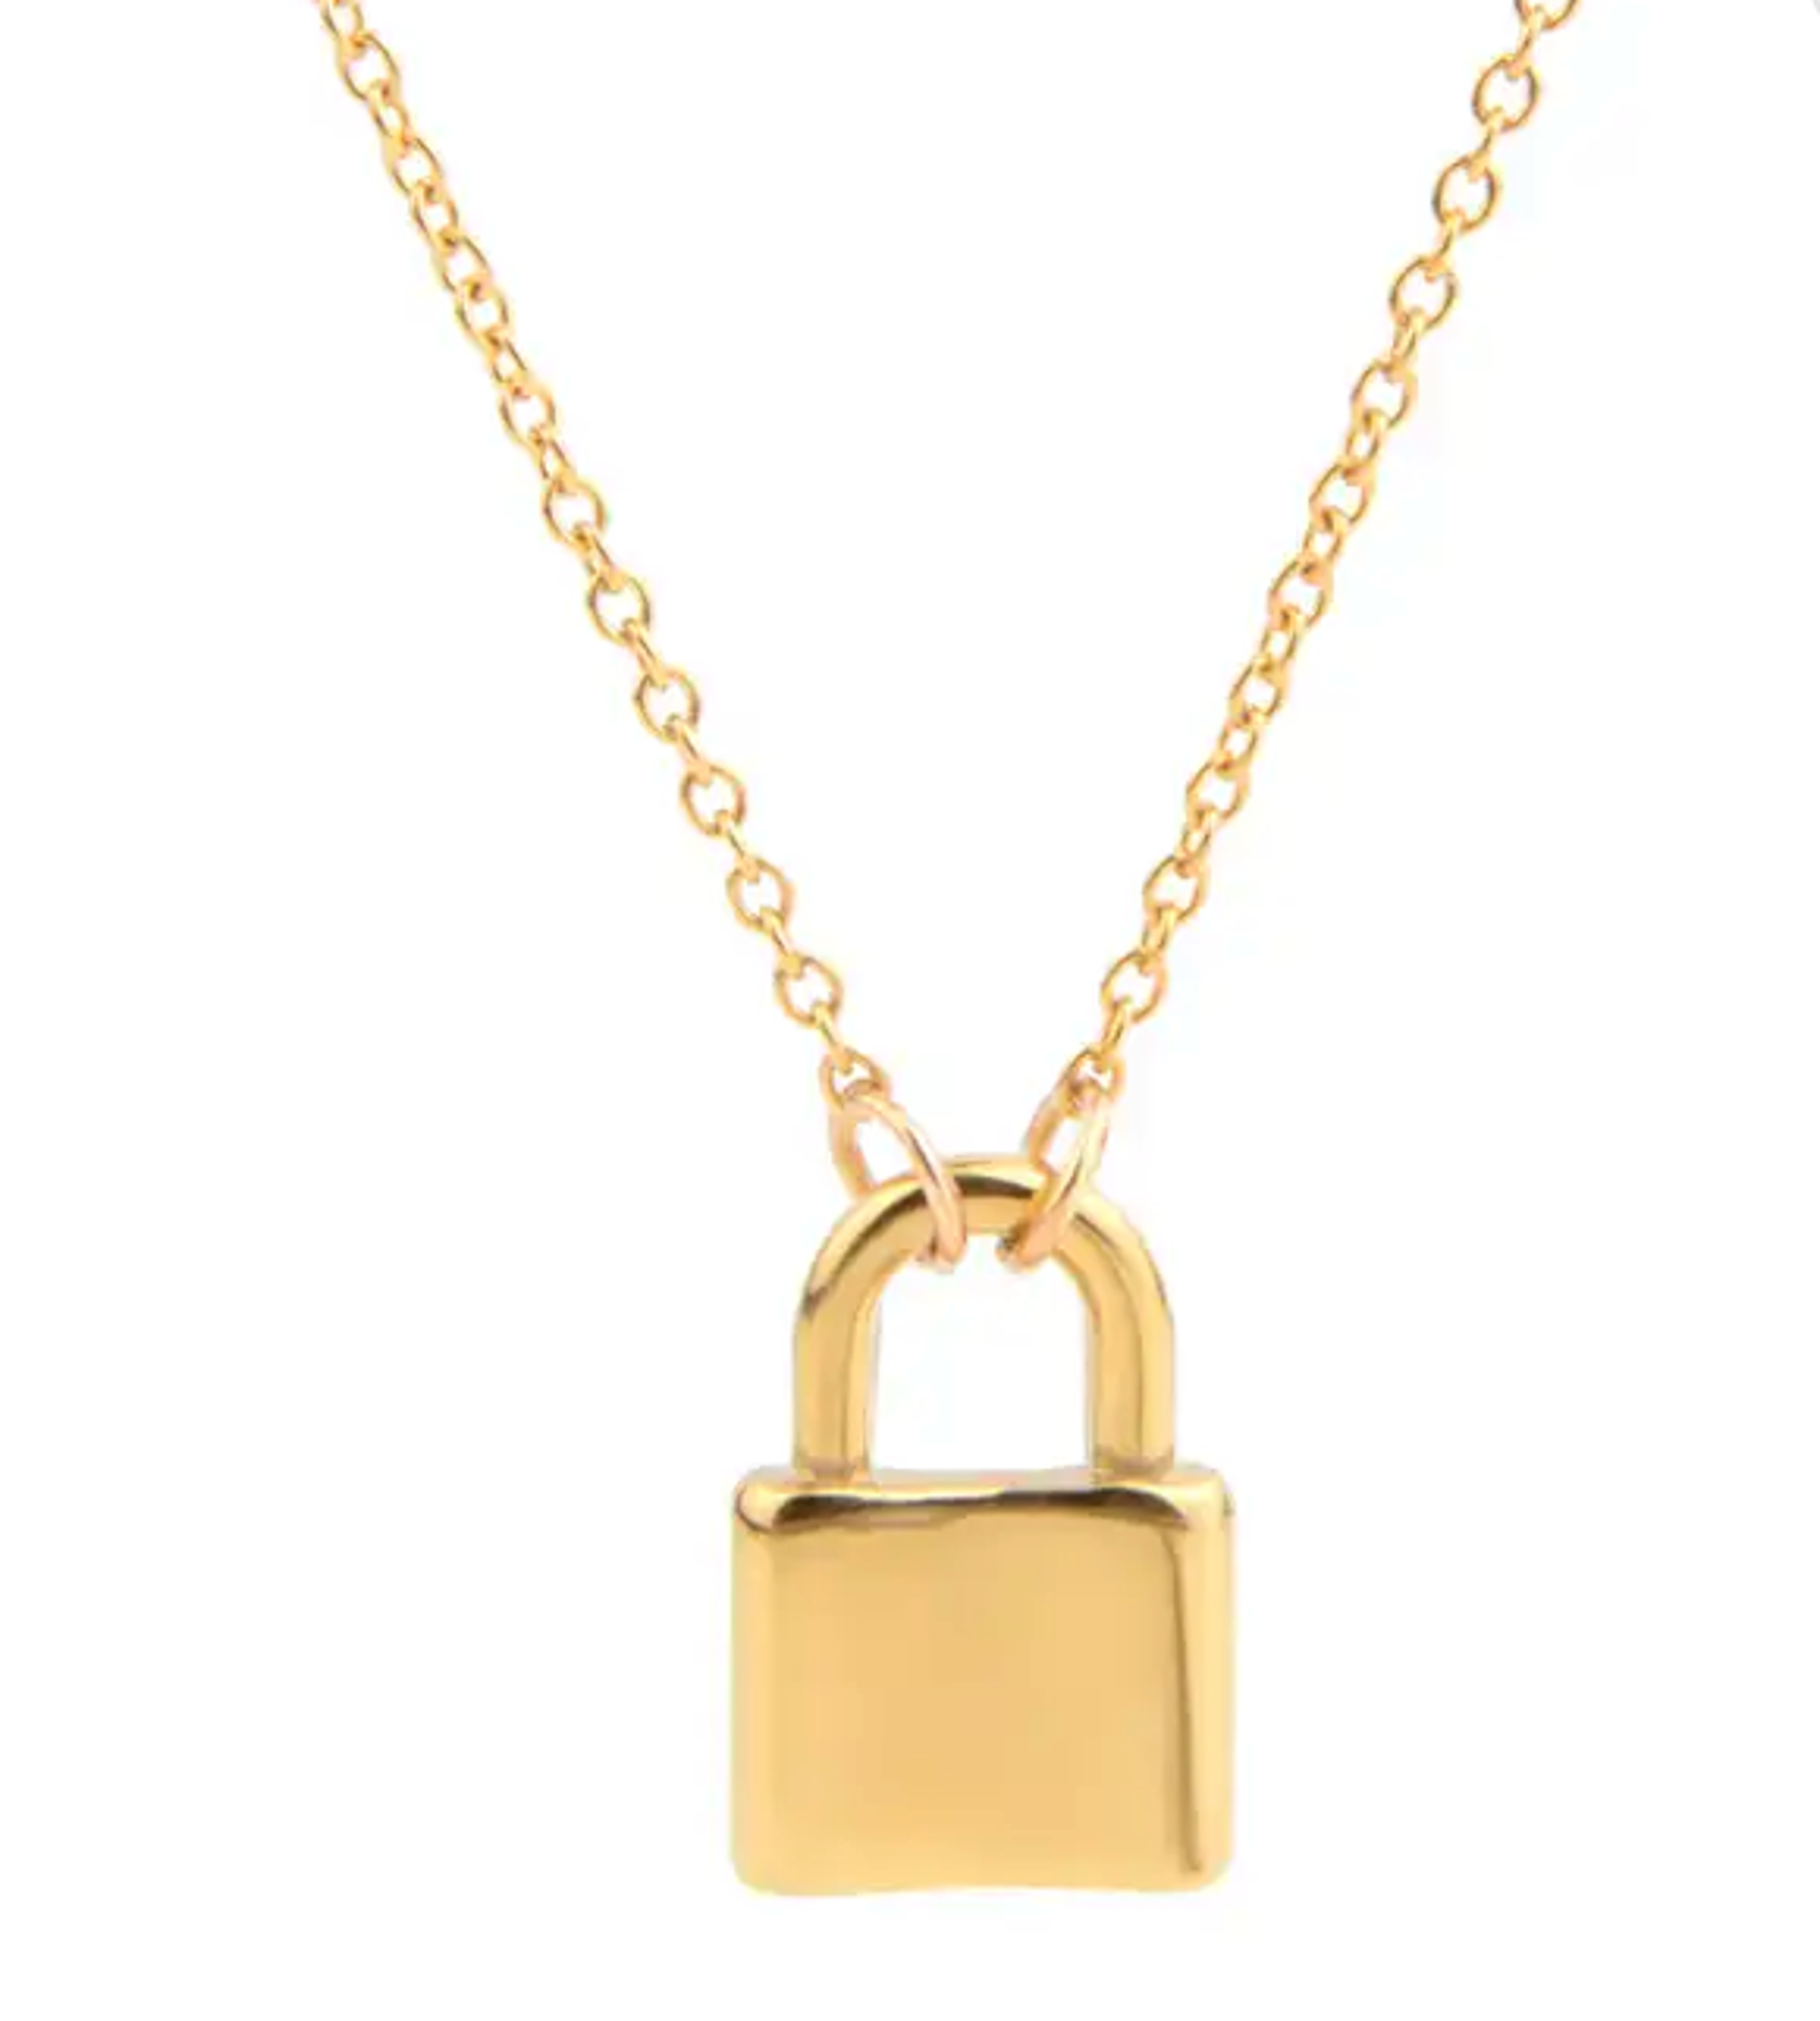 Alternate View 2 of NEW KimmieBBags Padlock Charm Necklace 061923